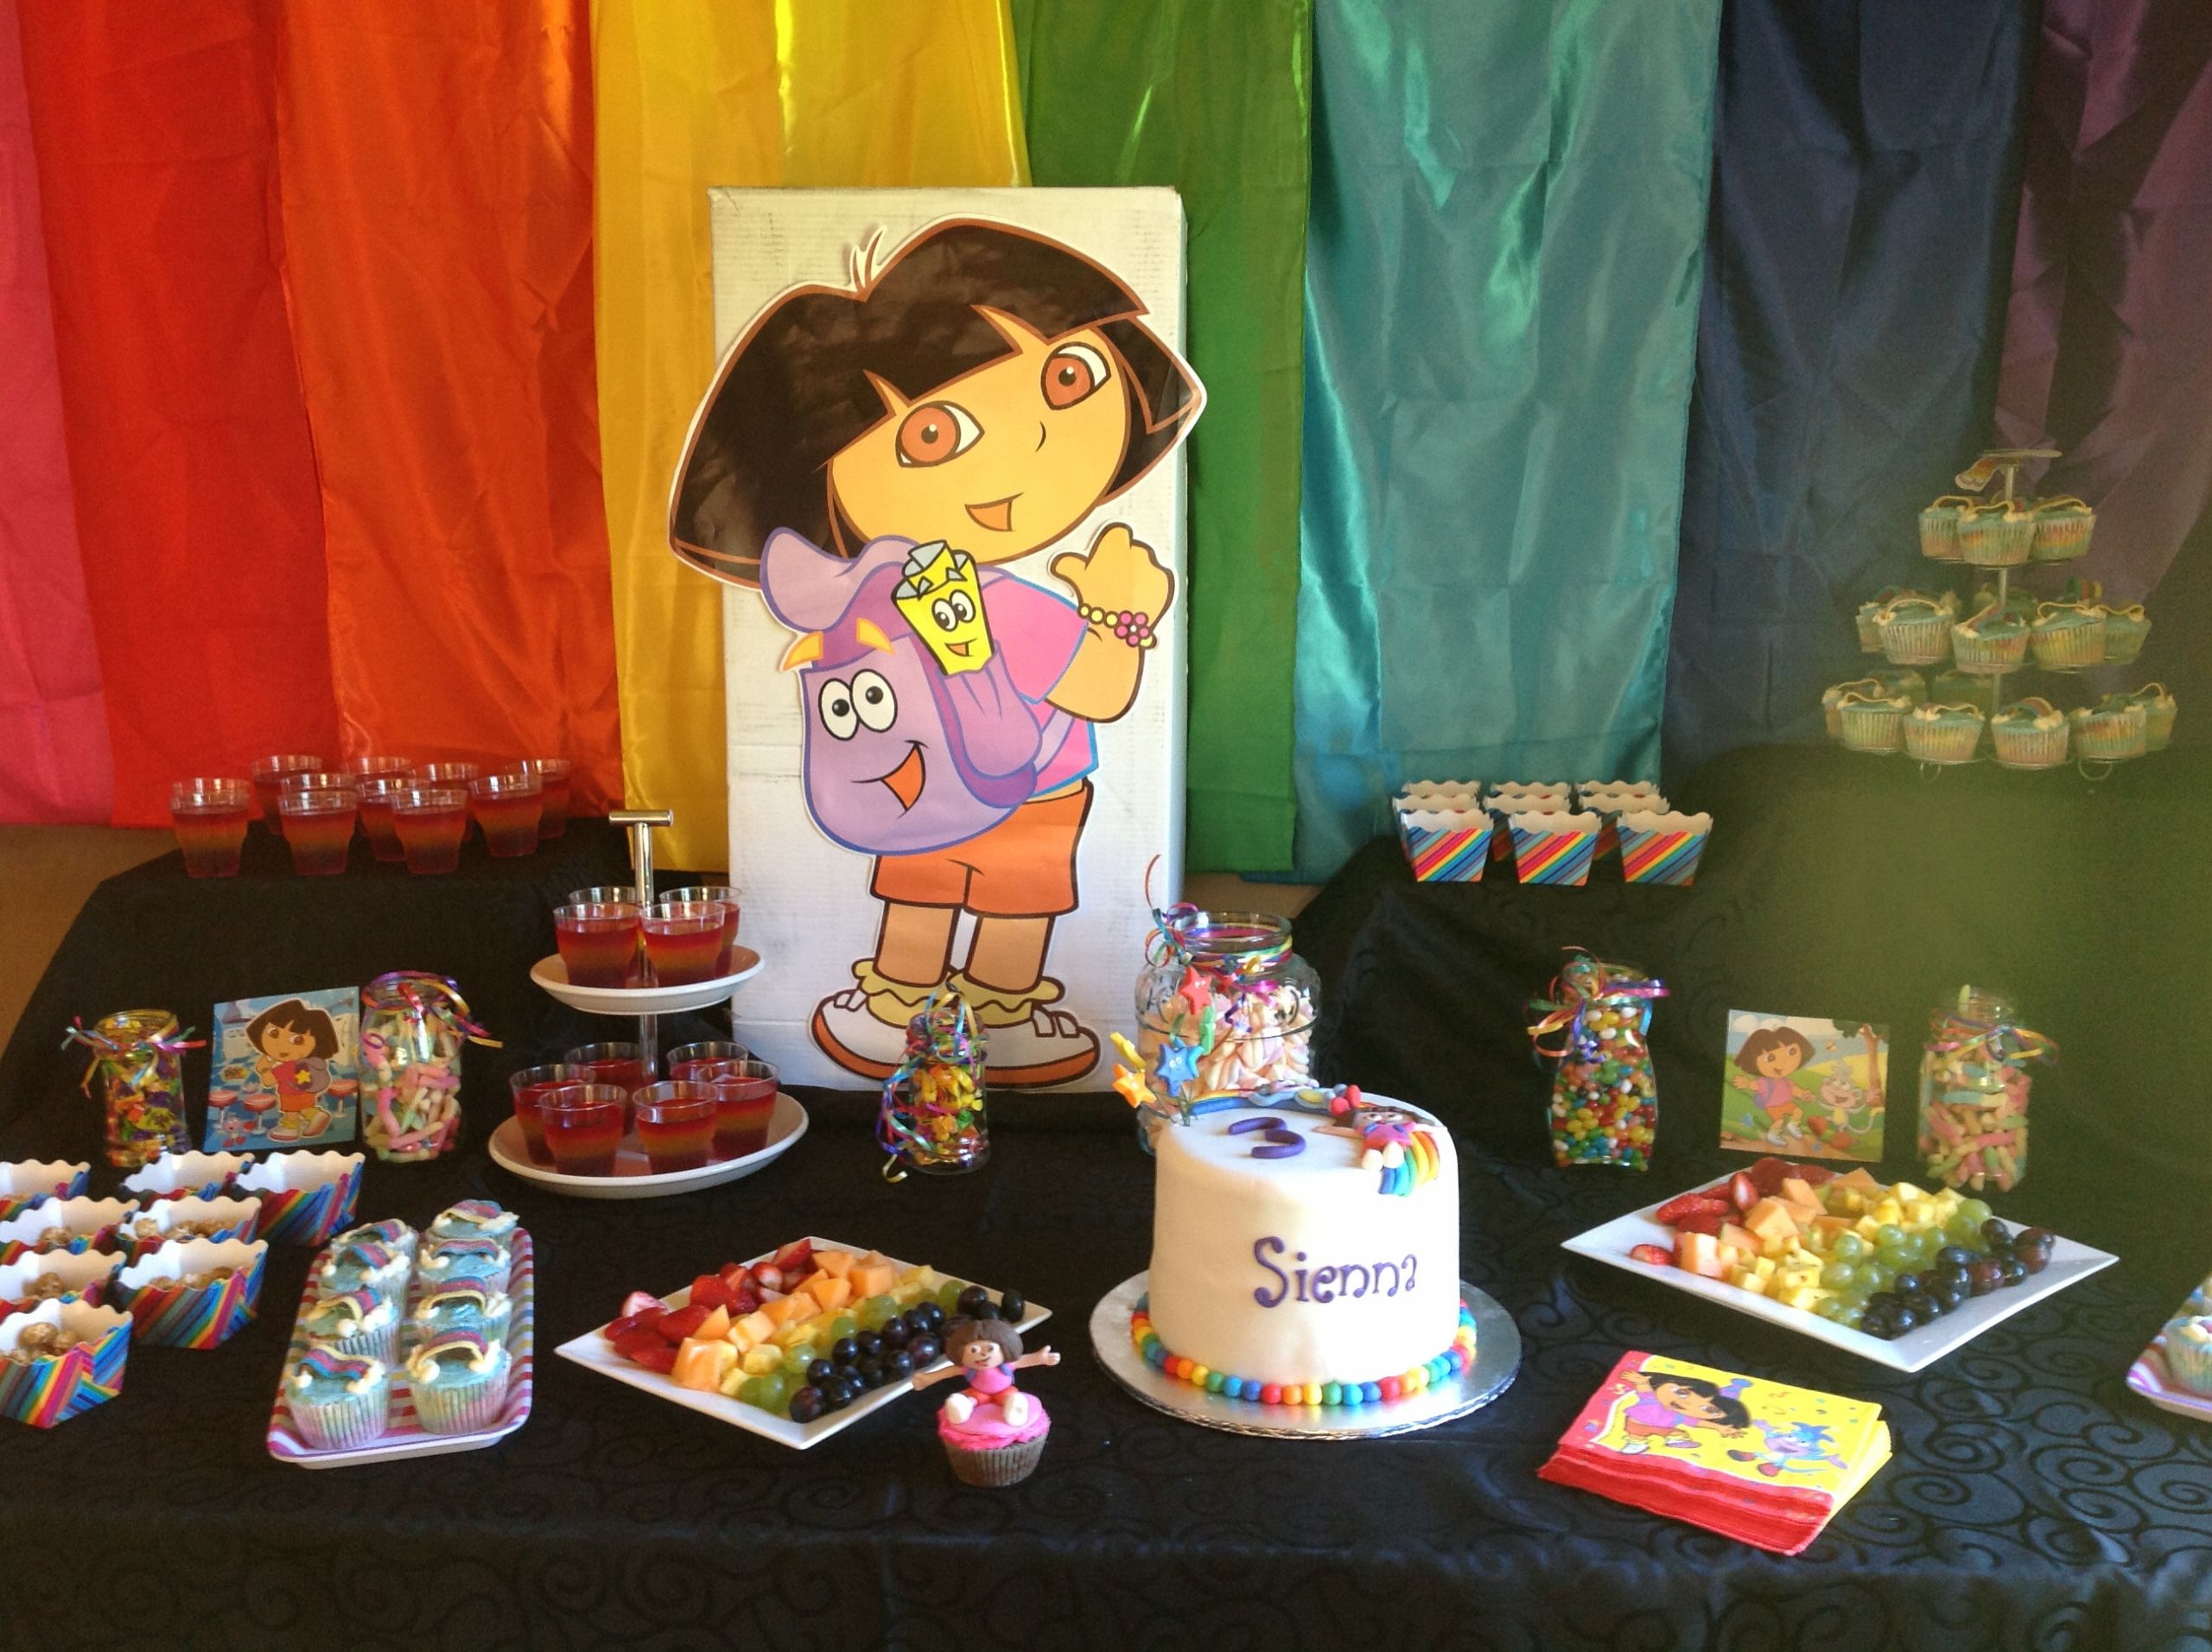 Dora Birthday Party Food Ideas
 Dora the Explorer Rainbow party for a 3 year old